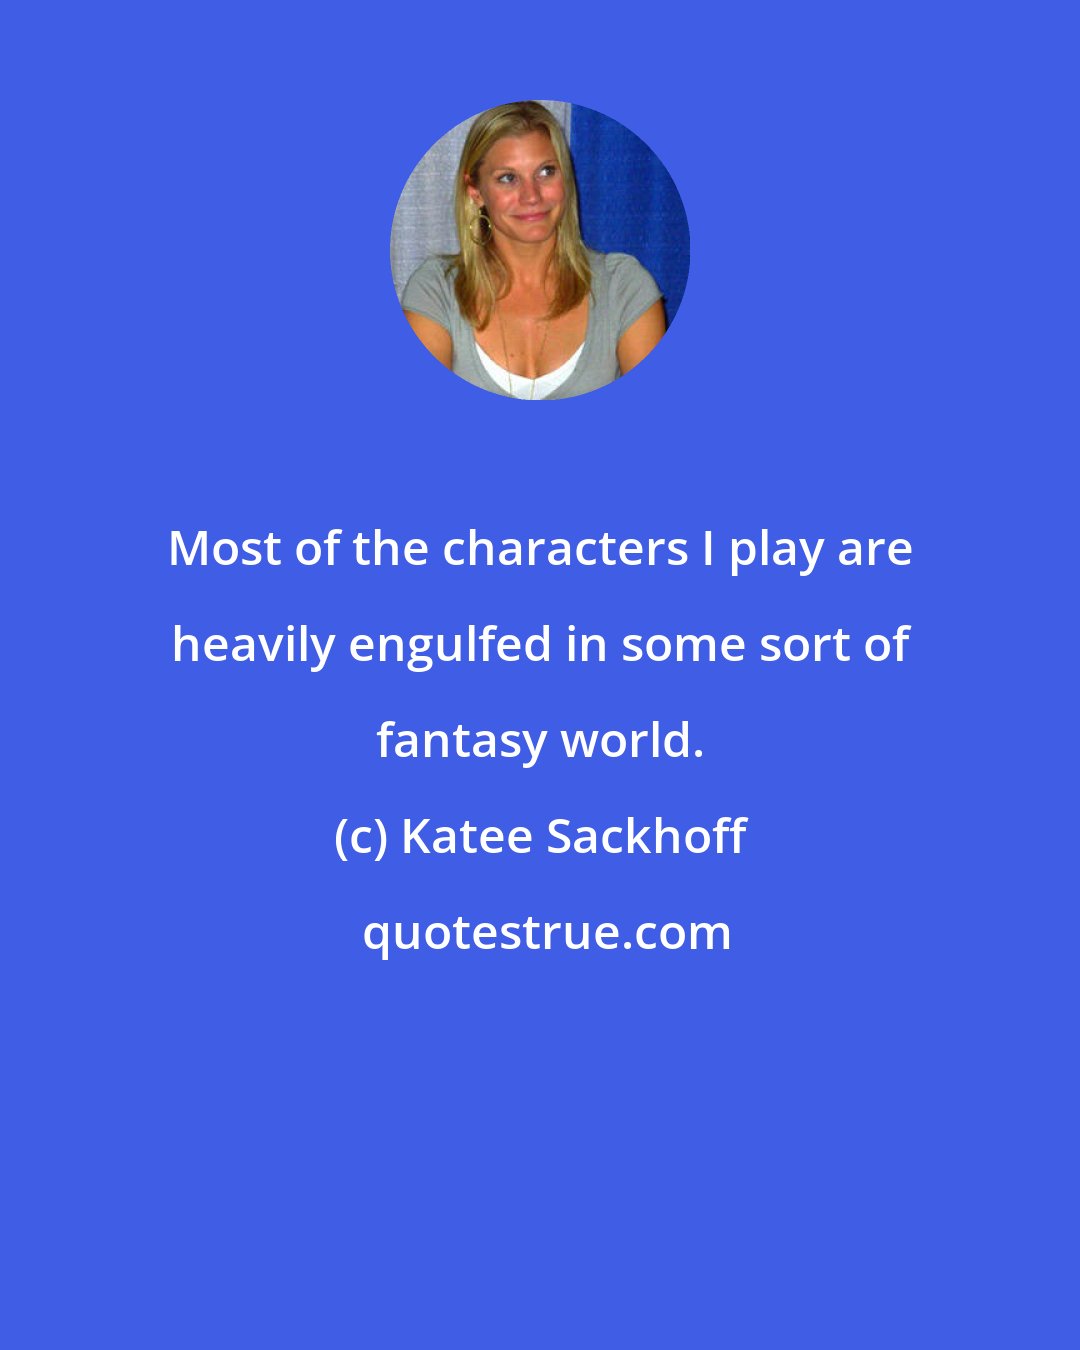 Katee Sackhoff: Most of the characters I play are heavily engulfed in some sort of fantasy world.